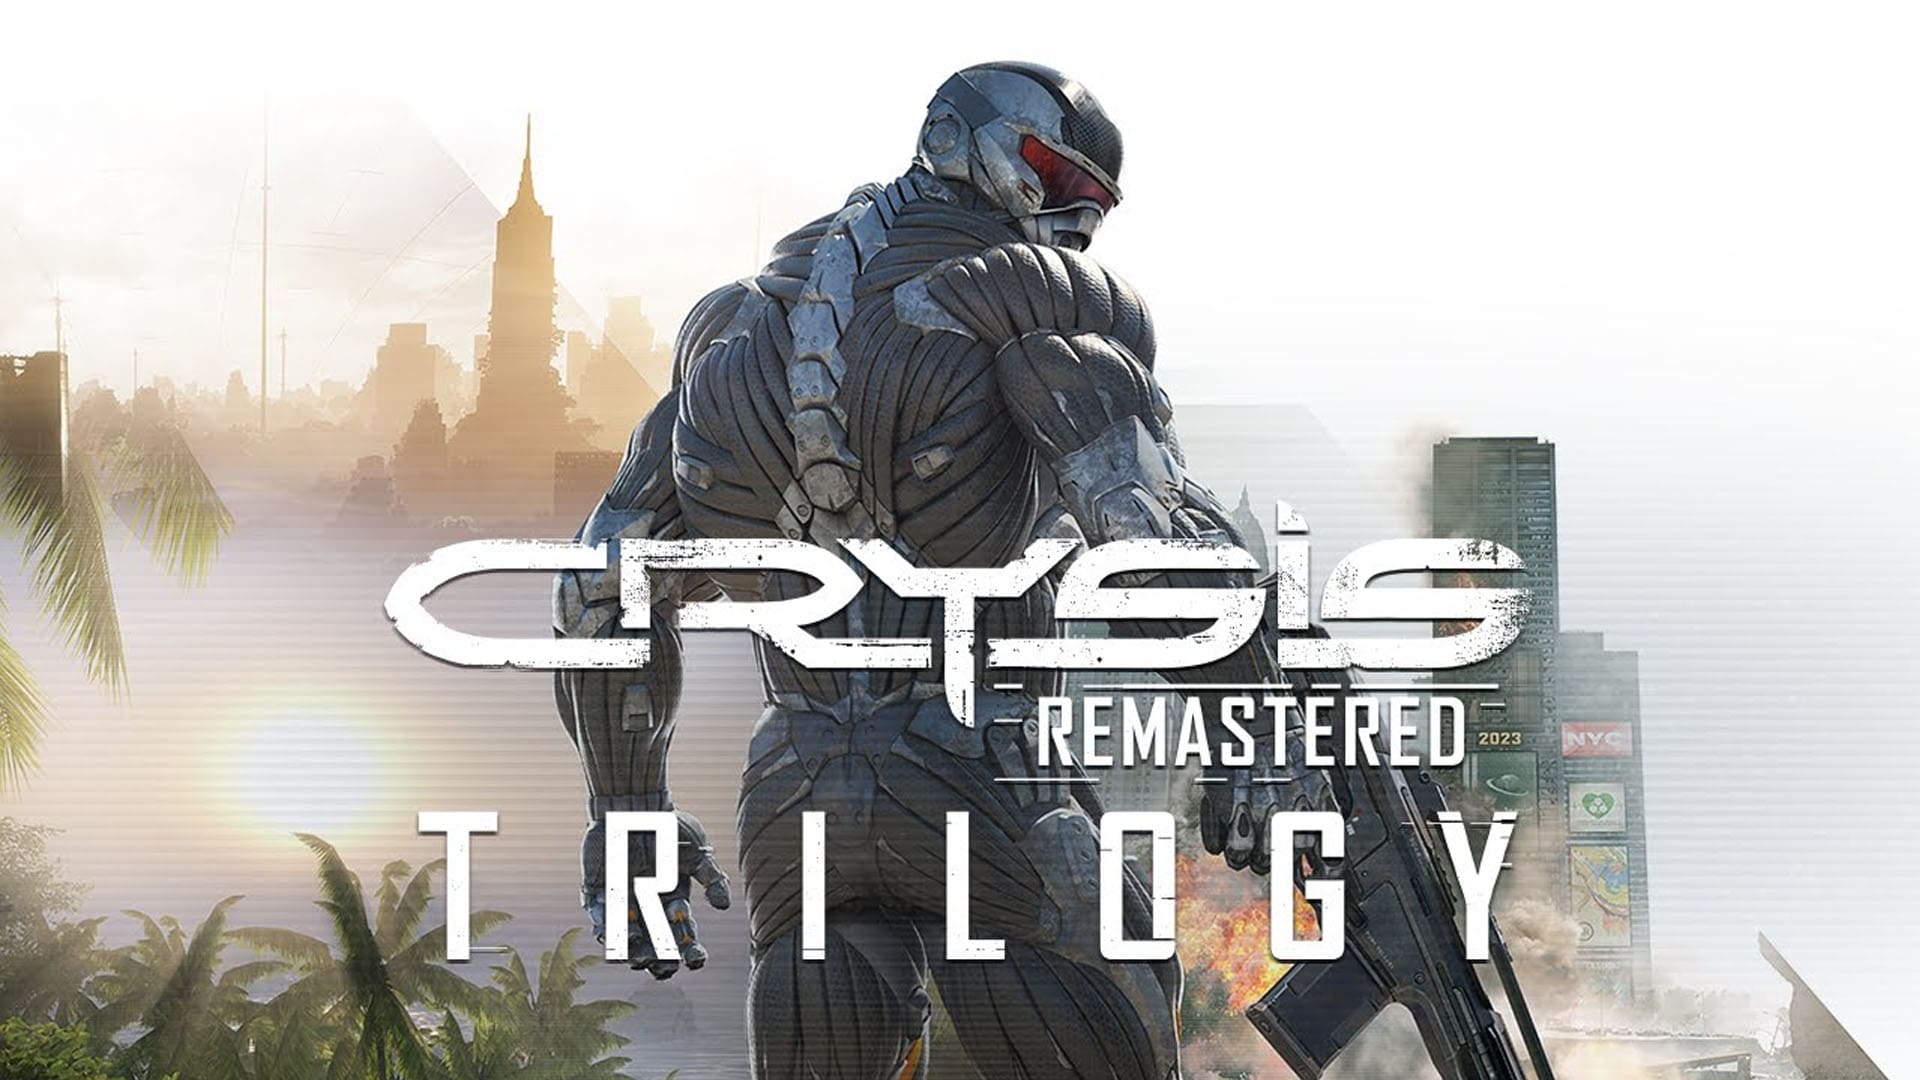 Crysis Remastered Trilogy bei uns im Test